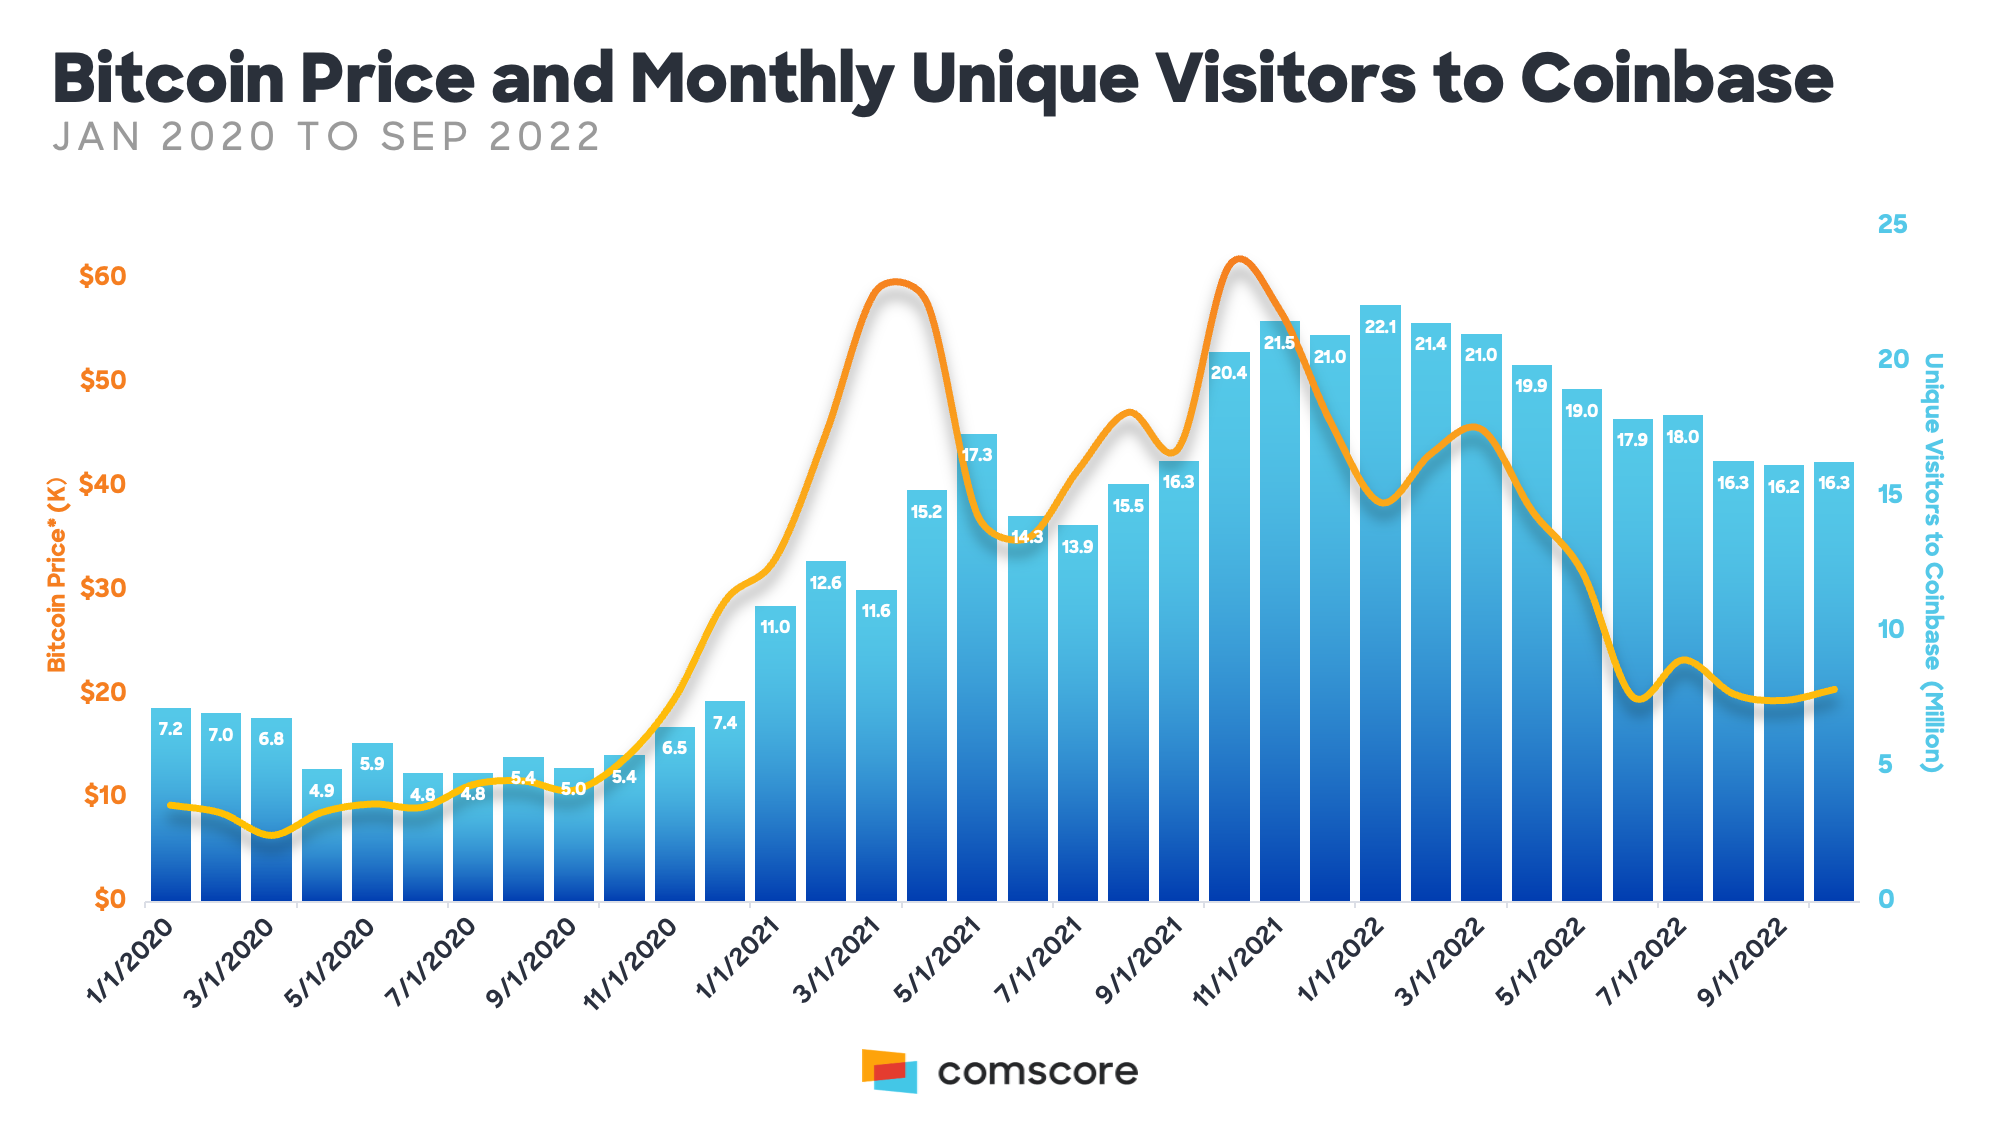 Bitcoin Price and Monthly Unique Visitors to Coinbase